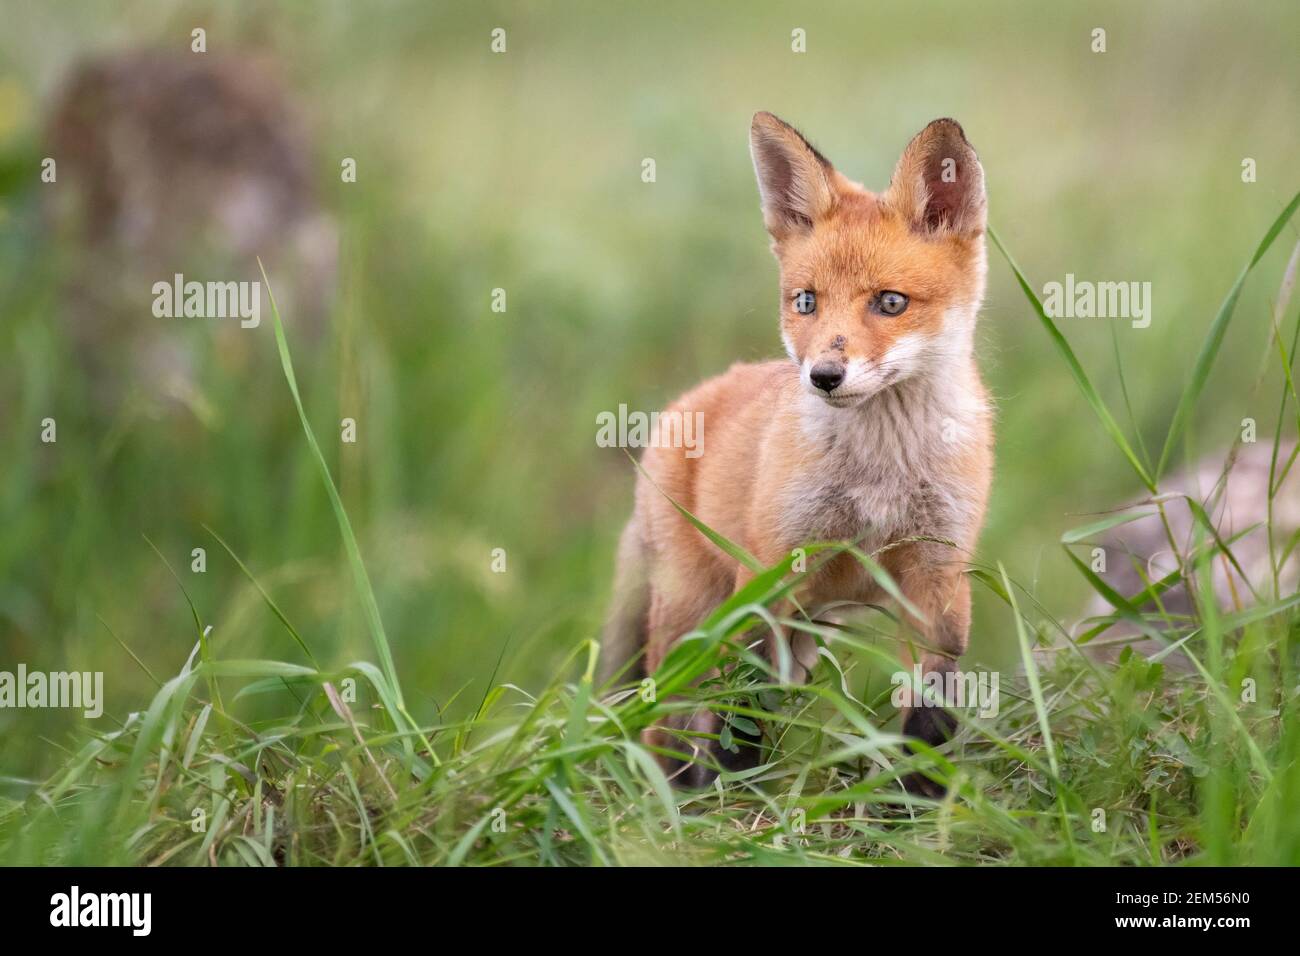 Baby Fox. Young red Fox in grass near his hole. Stock Photo